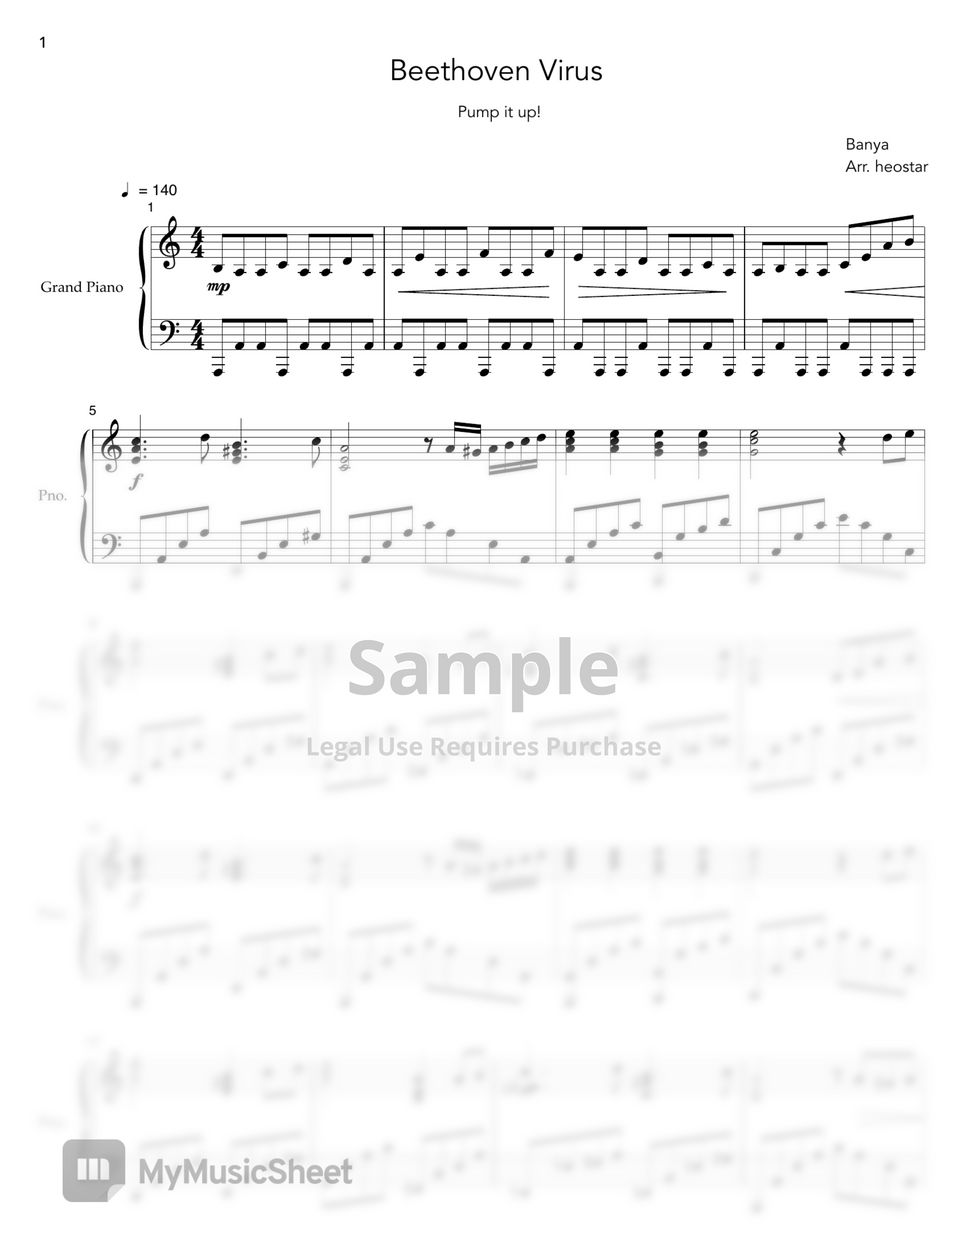 Pump It Up! - Beethoven Virus Sheets by heostar